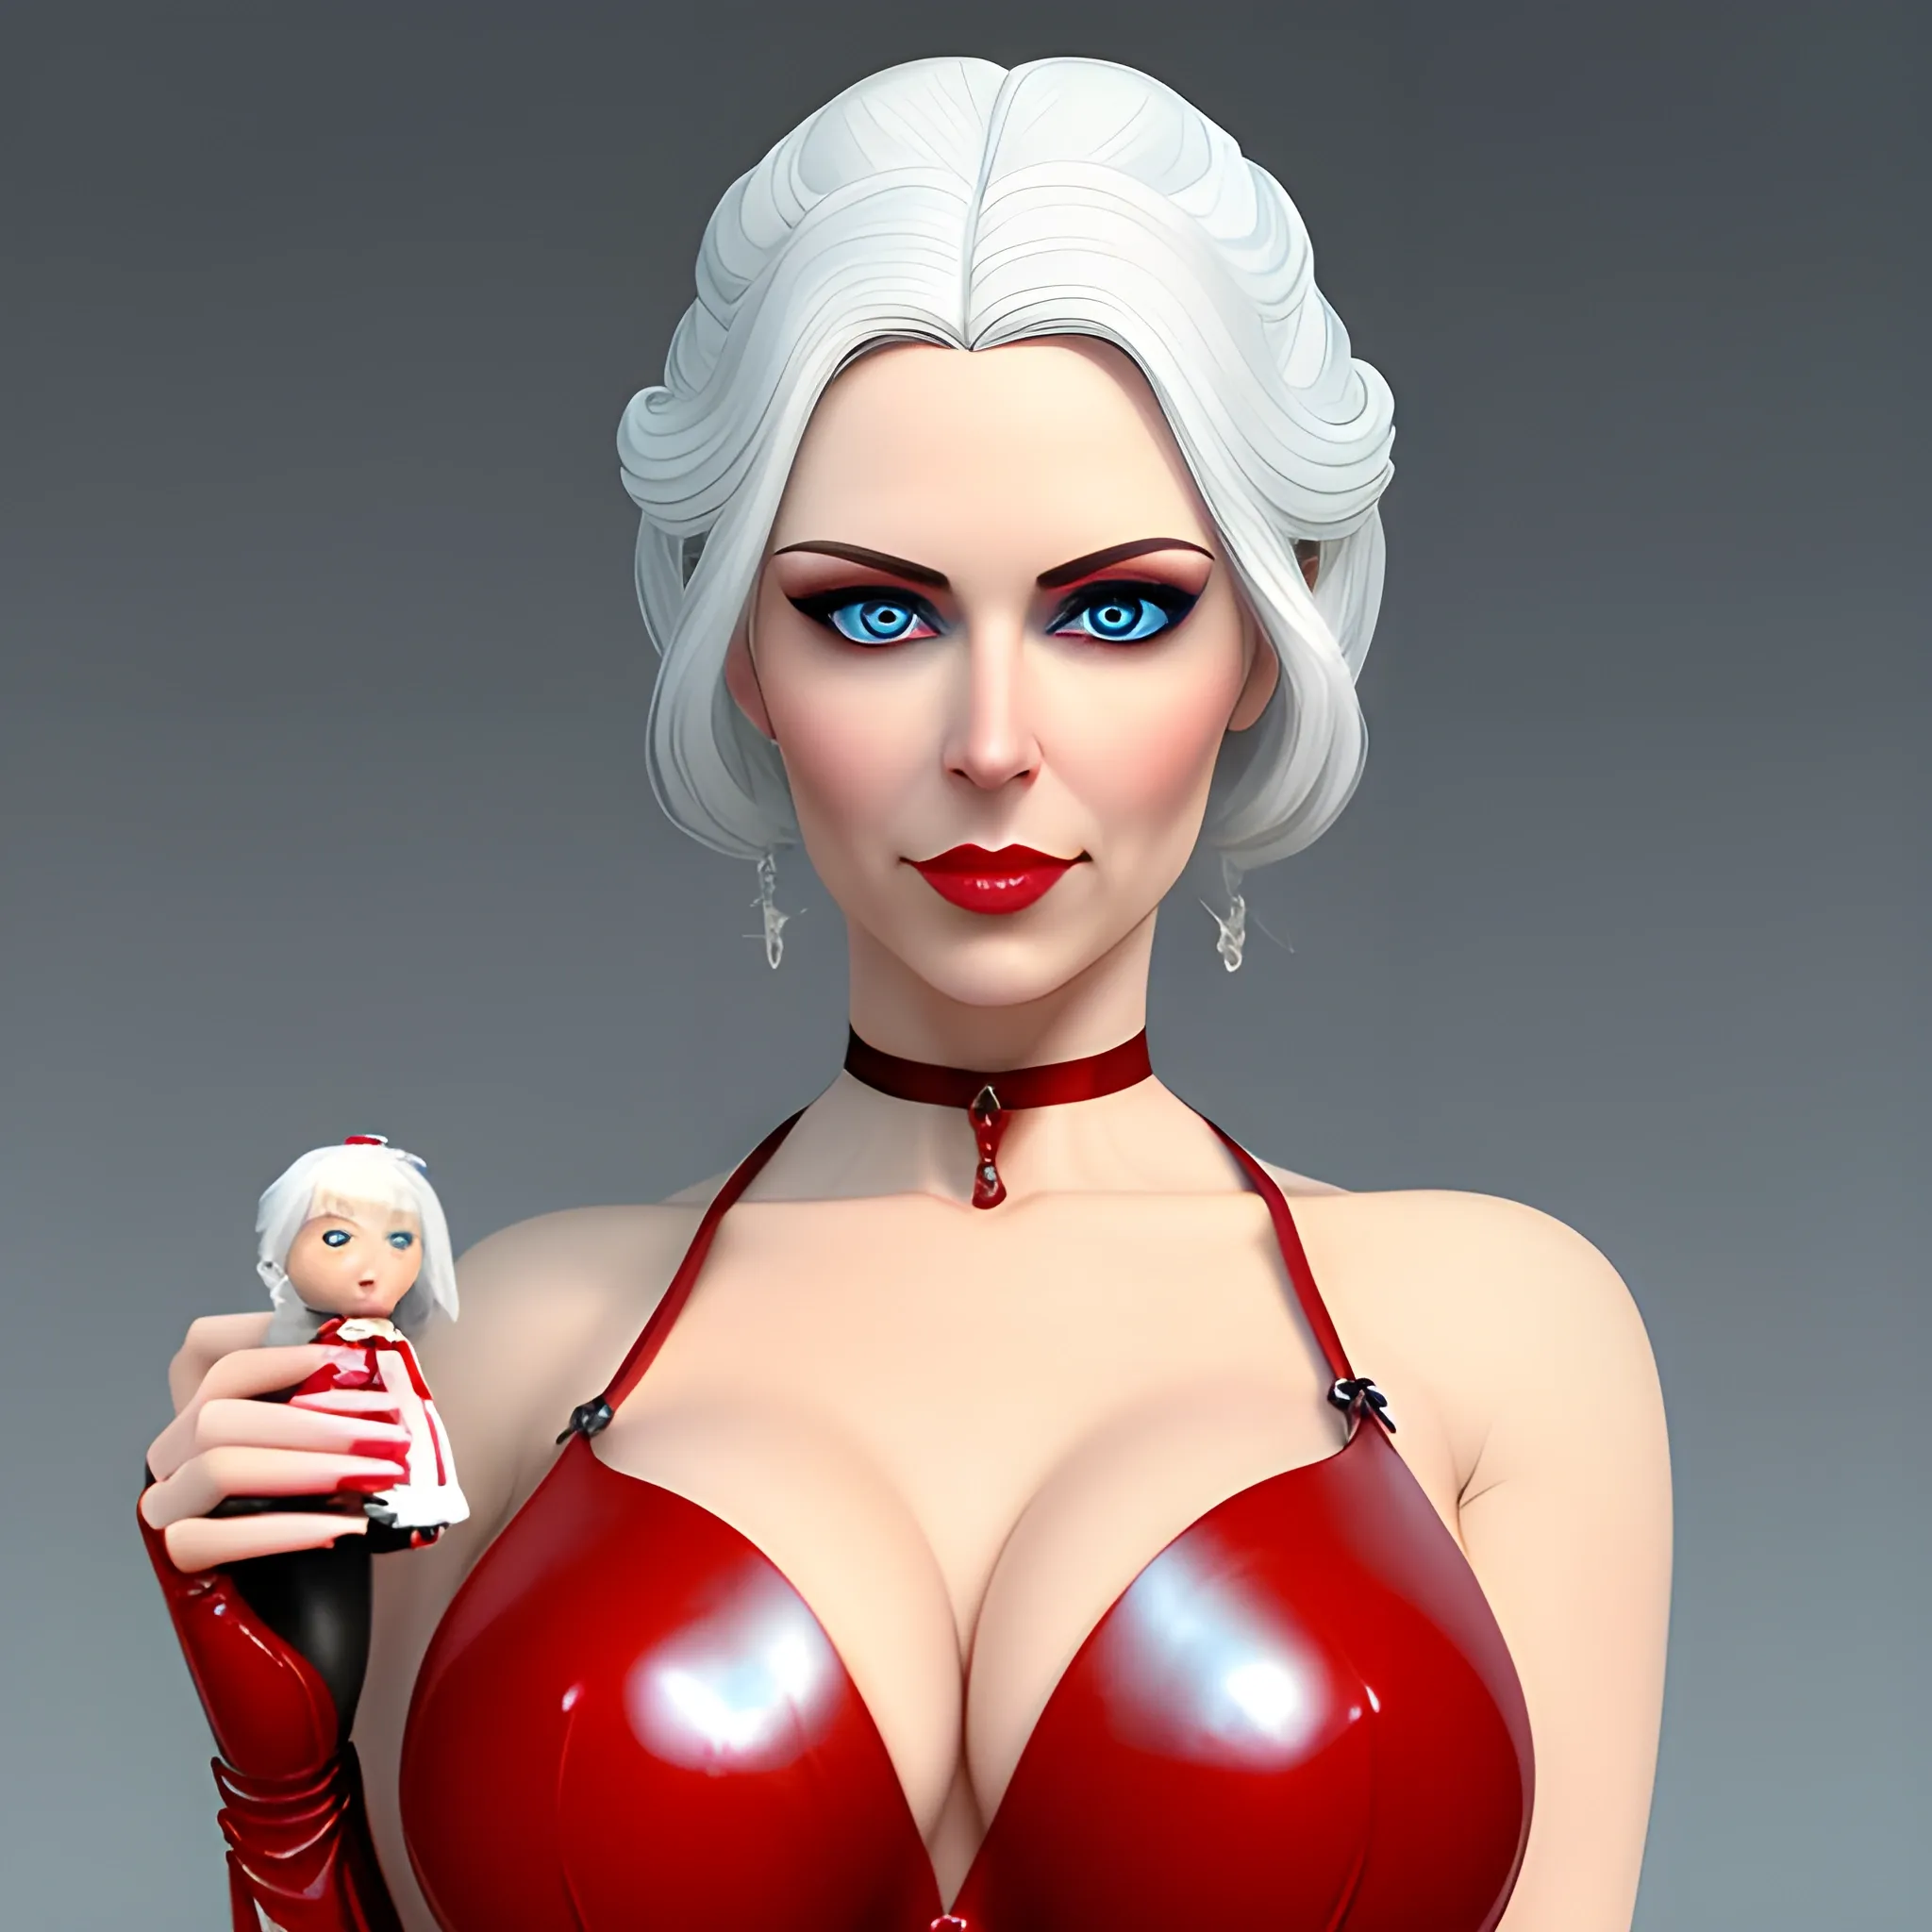 Create a photorealistic image of a cute young girl with white hair and light blue eyes, she has small breasts that are naked and visible, she wears a red dress from the Victorian era in latex and leather, she holds a doll in her hands, pretty eyes, sweet mouth, whole body visible, Highest level of detail